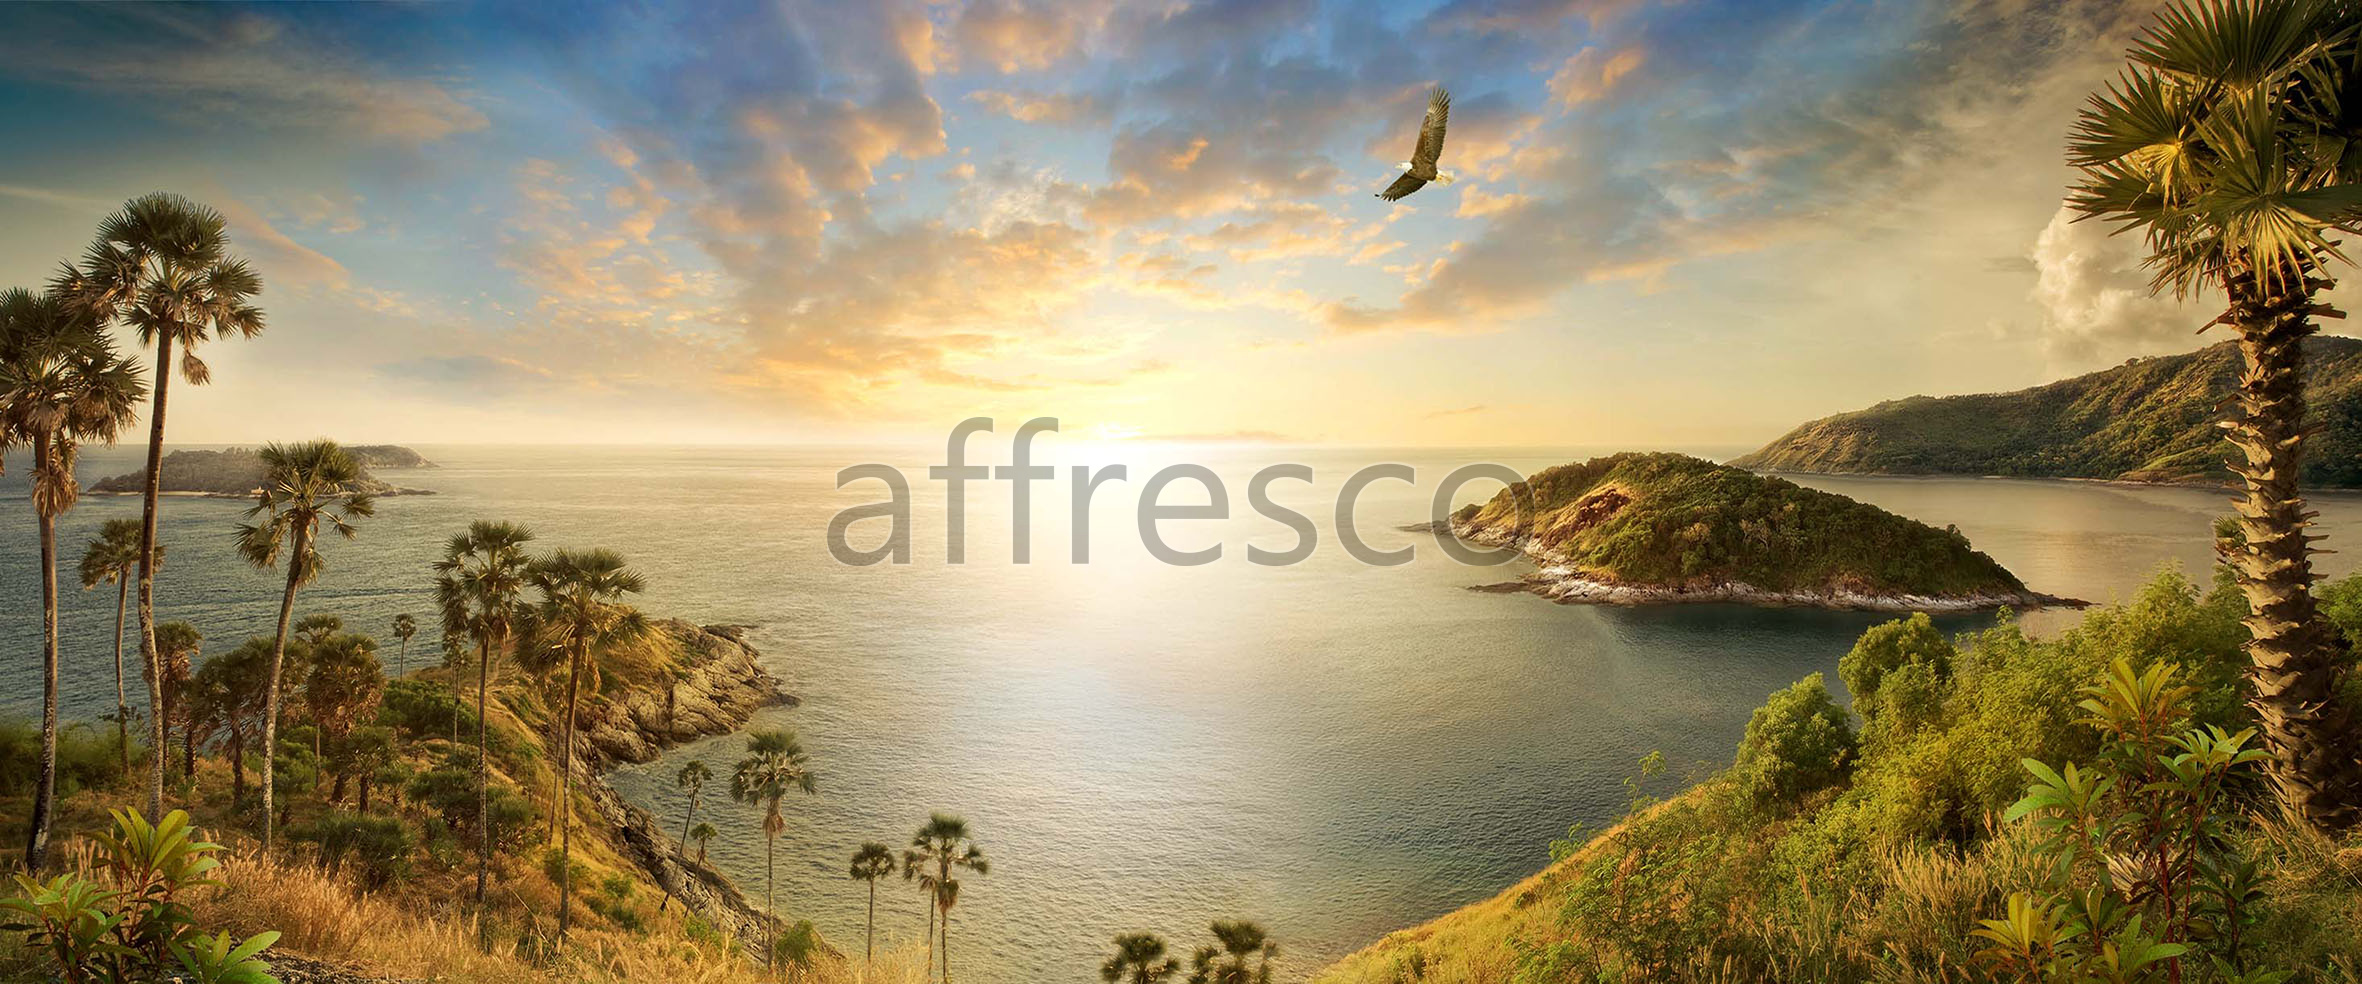 ID11153 | The best landscapes | id11153 | Affresco Factory